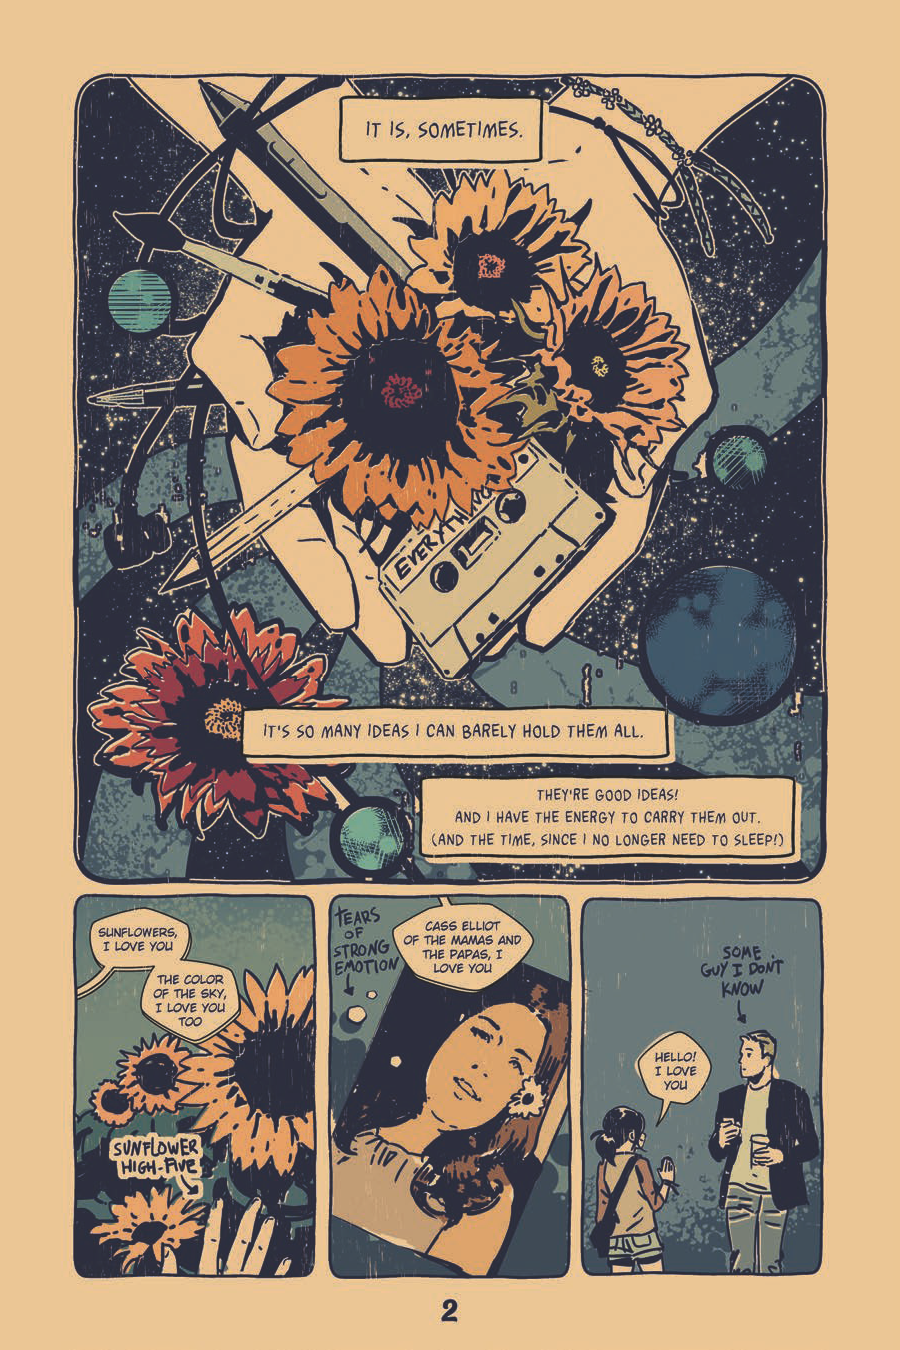 PDF Download: Sunflowers by Keezy Young